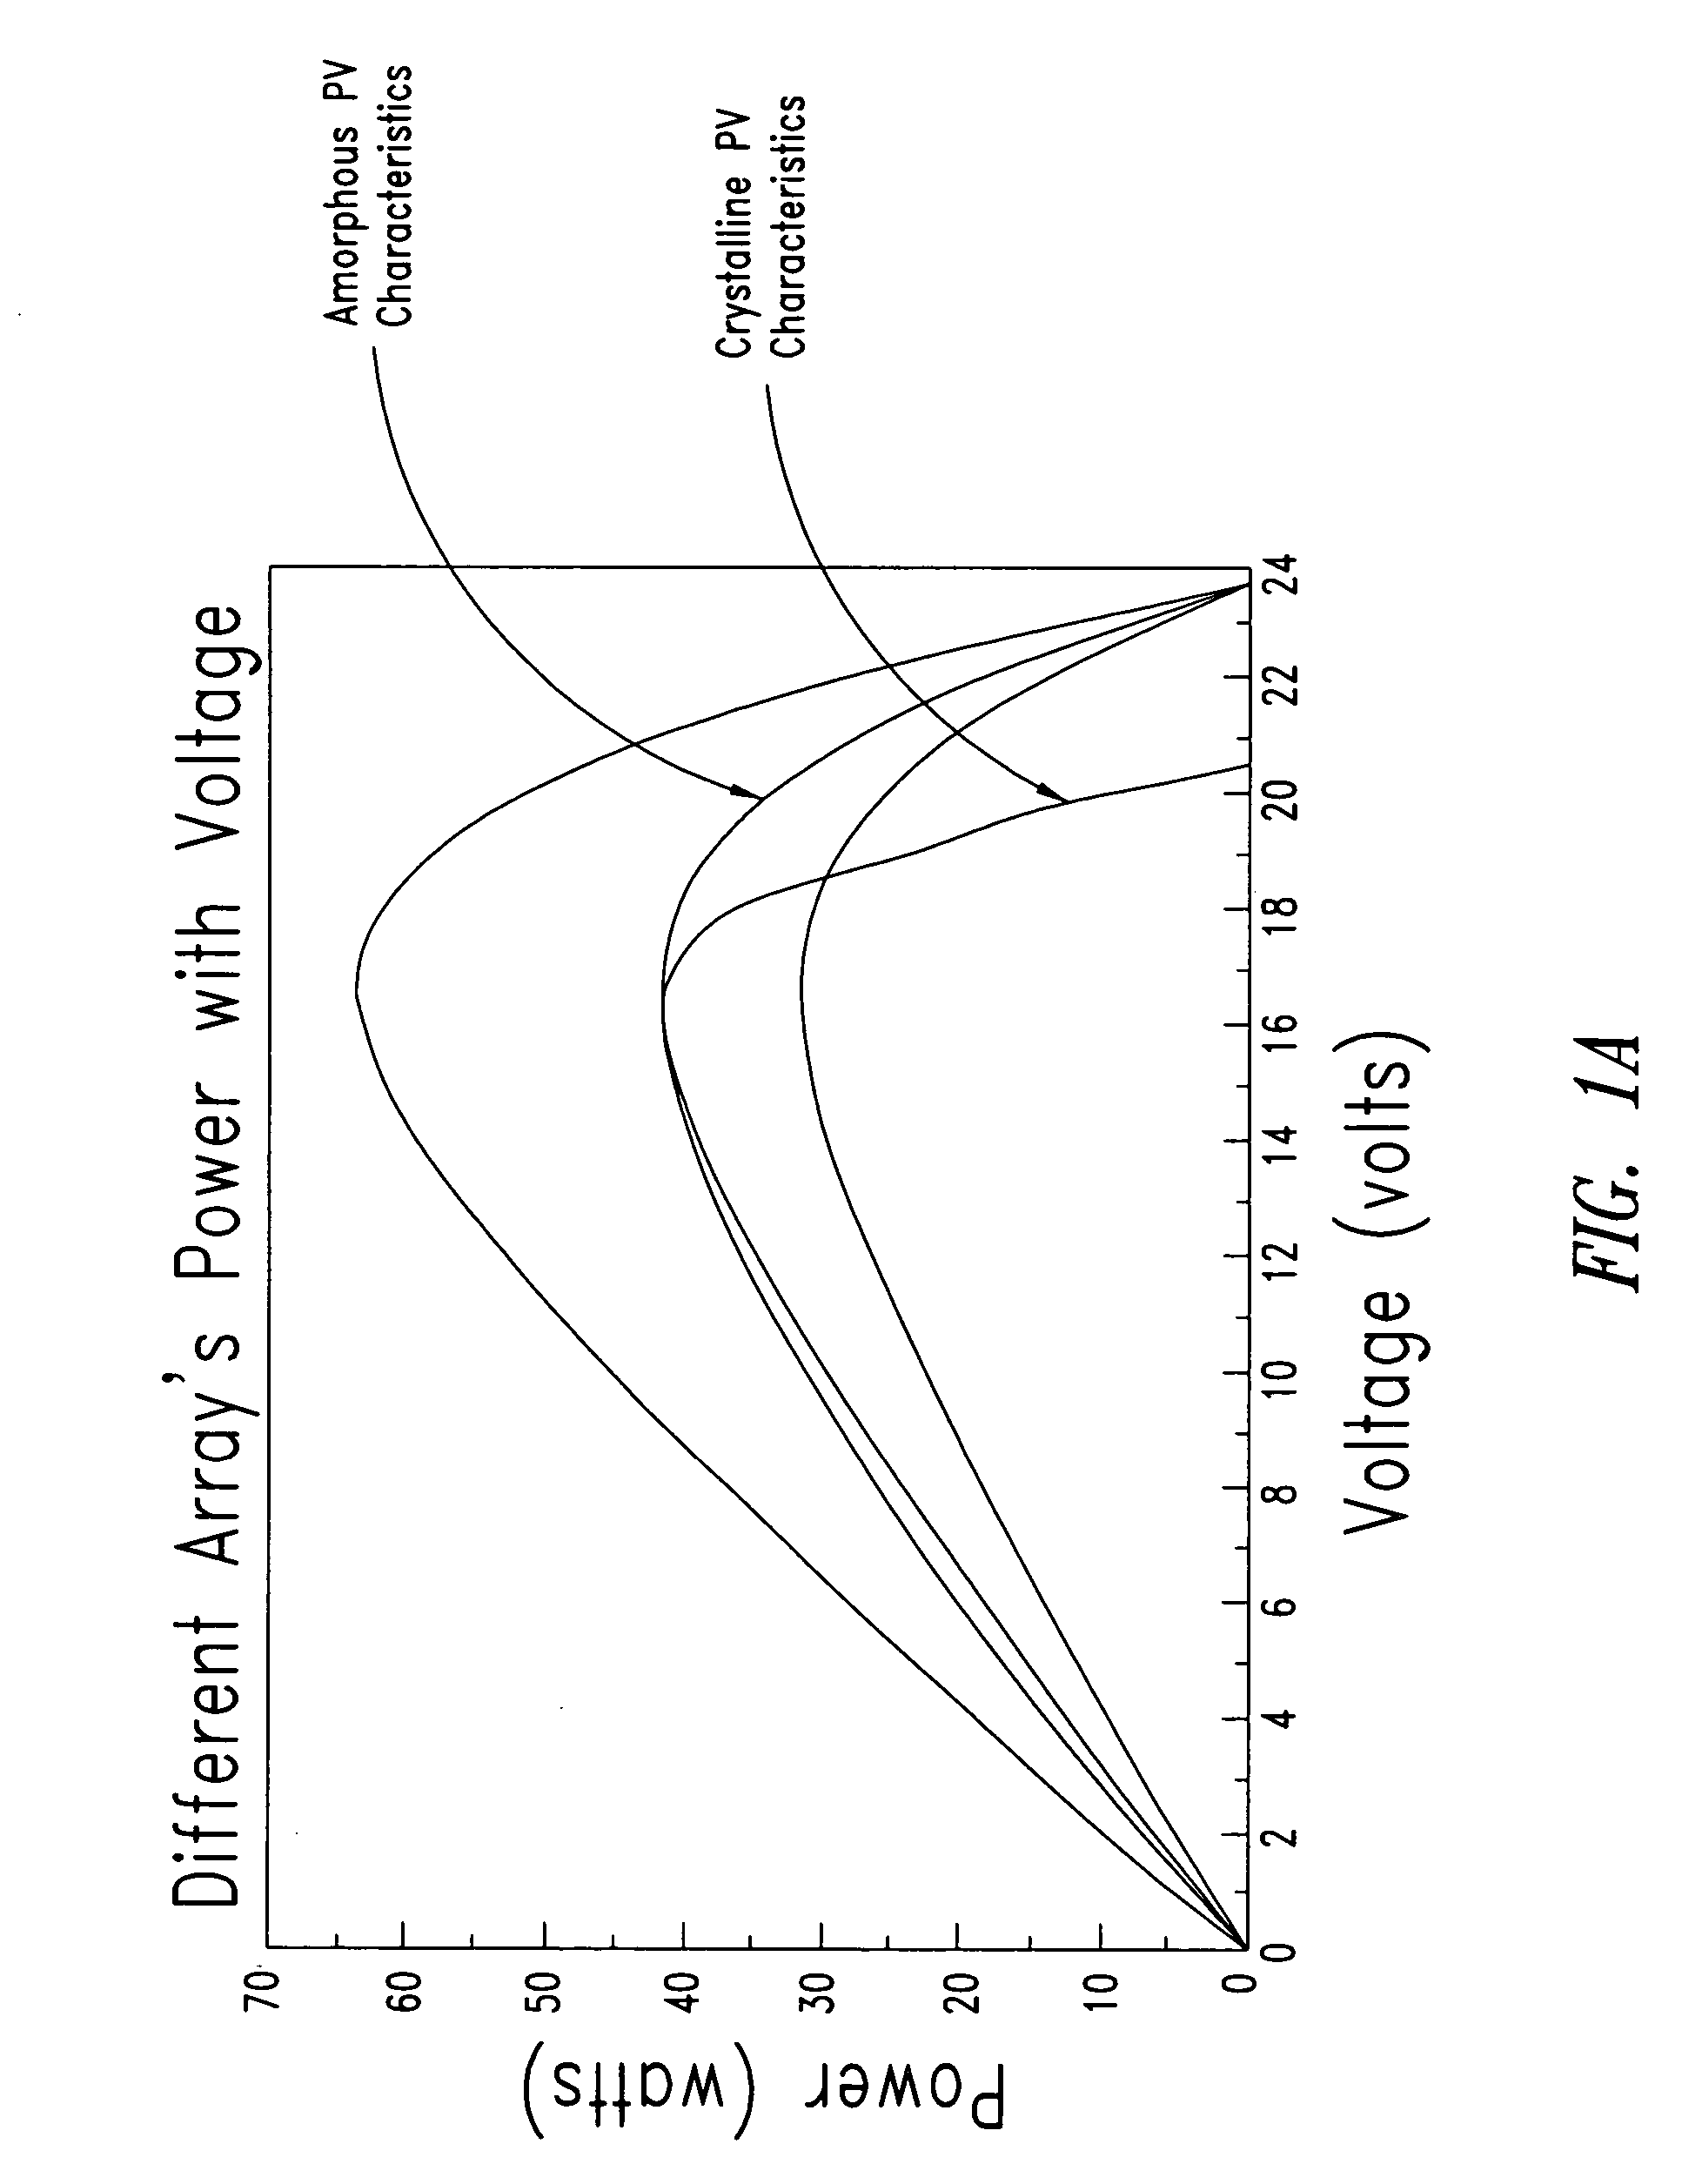 Method and apparatus for tracking maximum power point for inverters, for example, in photovoltaic applications